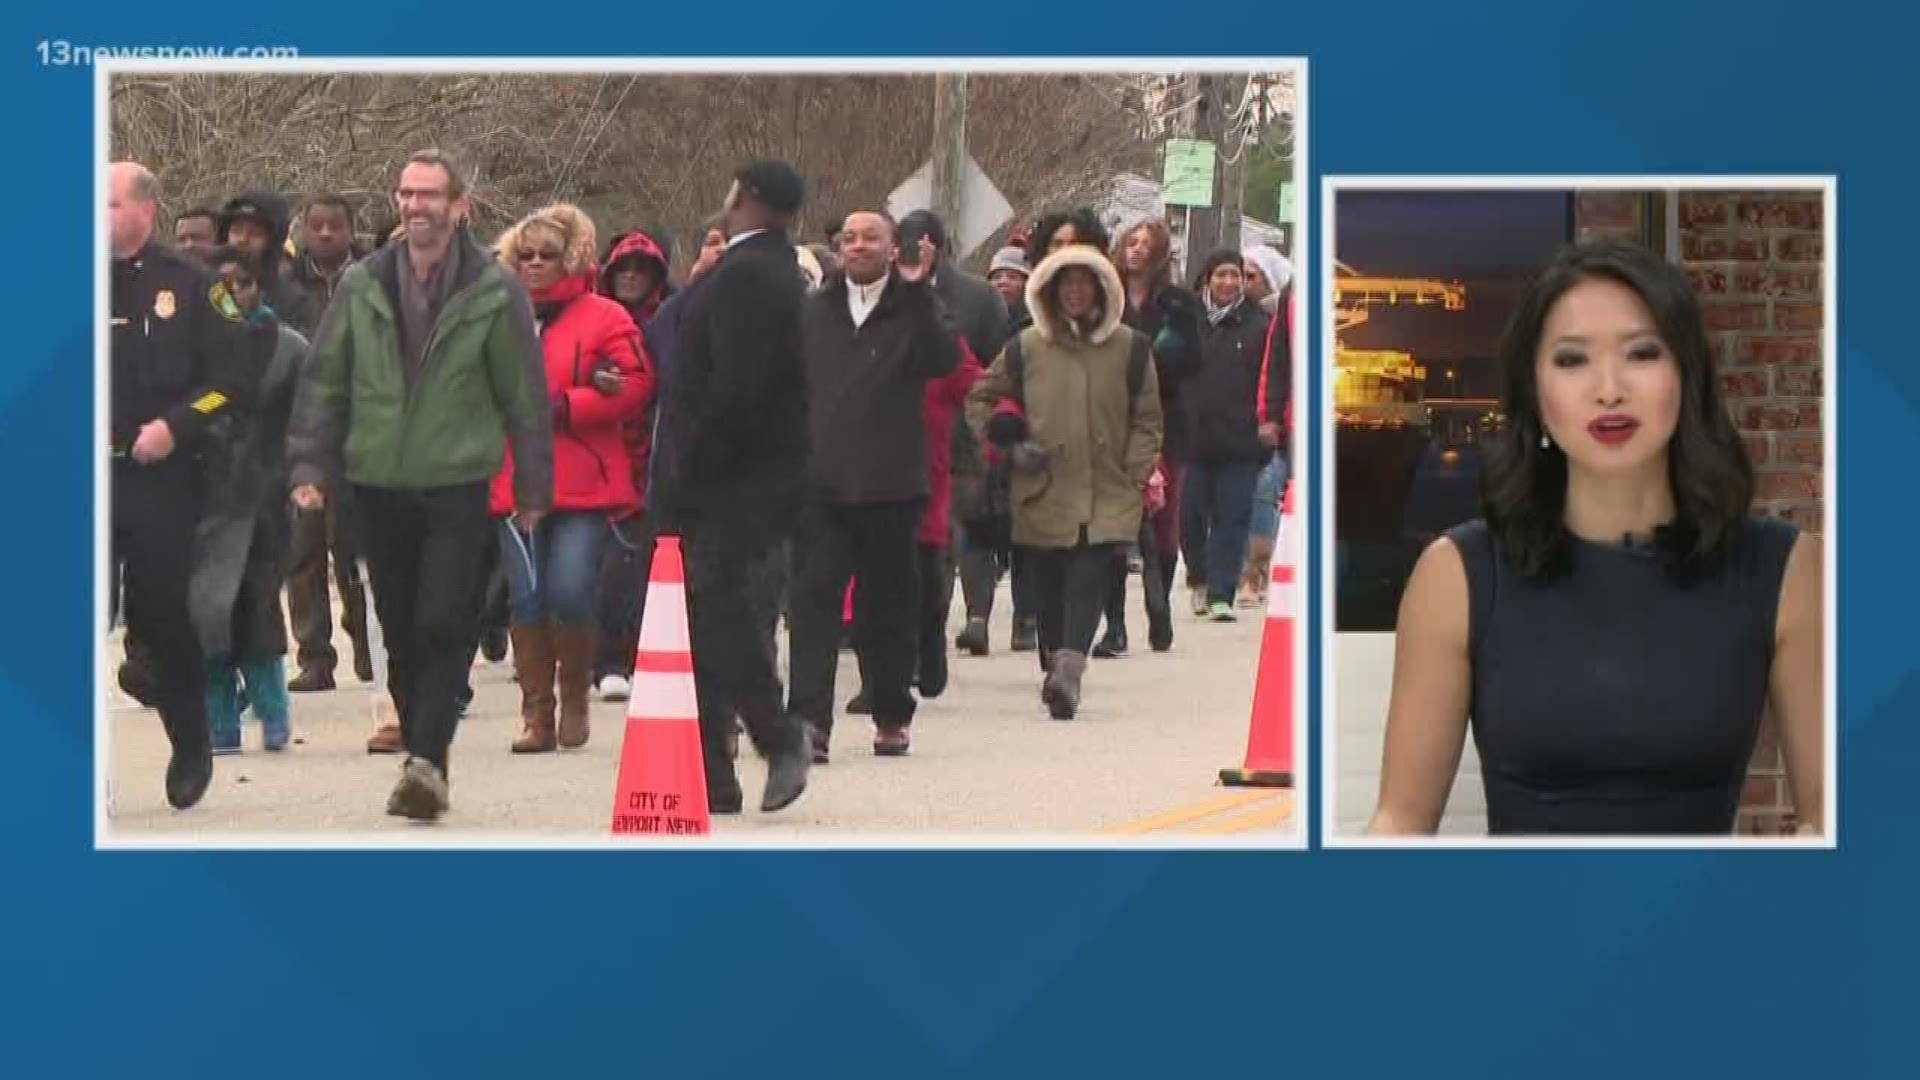 A parade took place in Newport News on Sunday to honor Dr. Martin Luther King Jr.